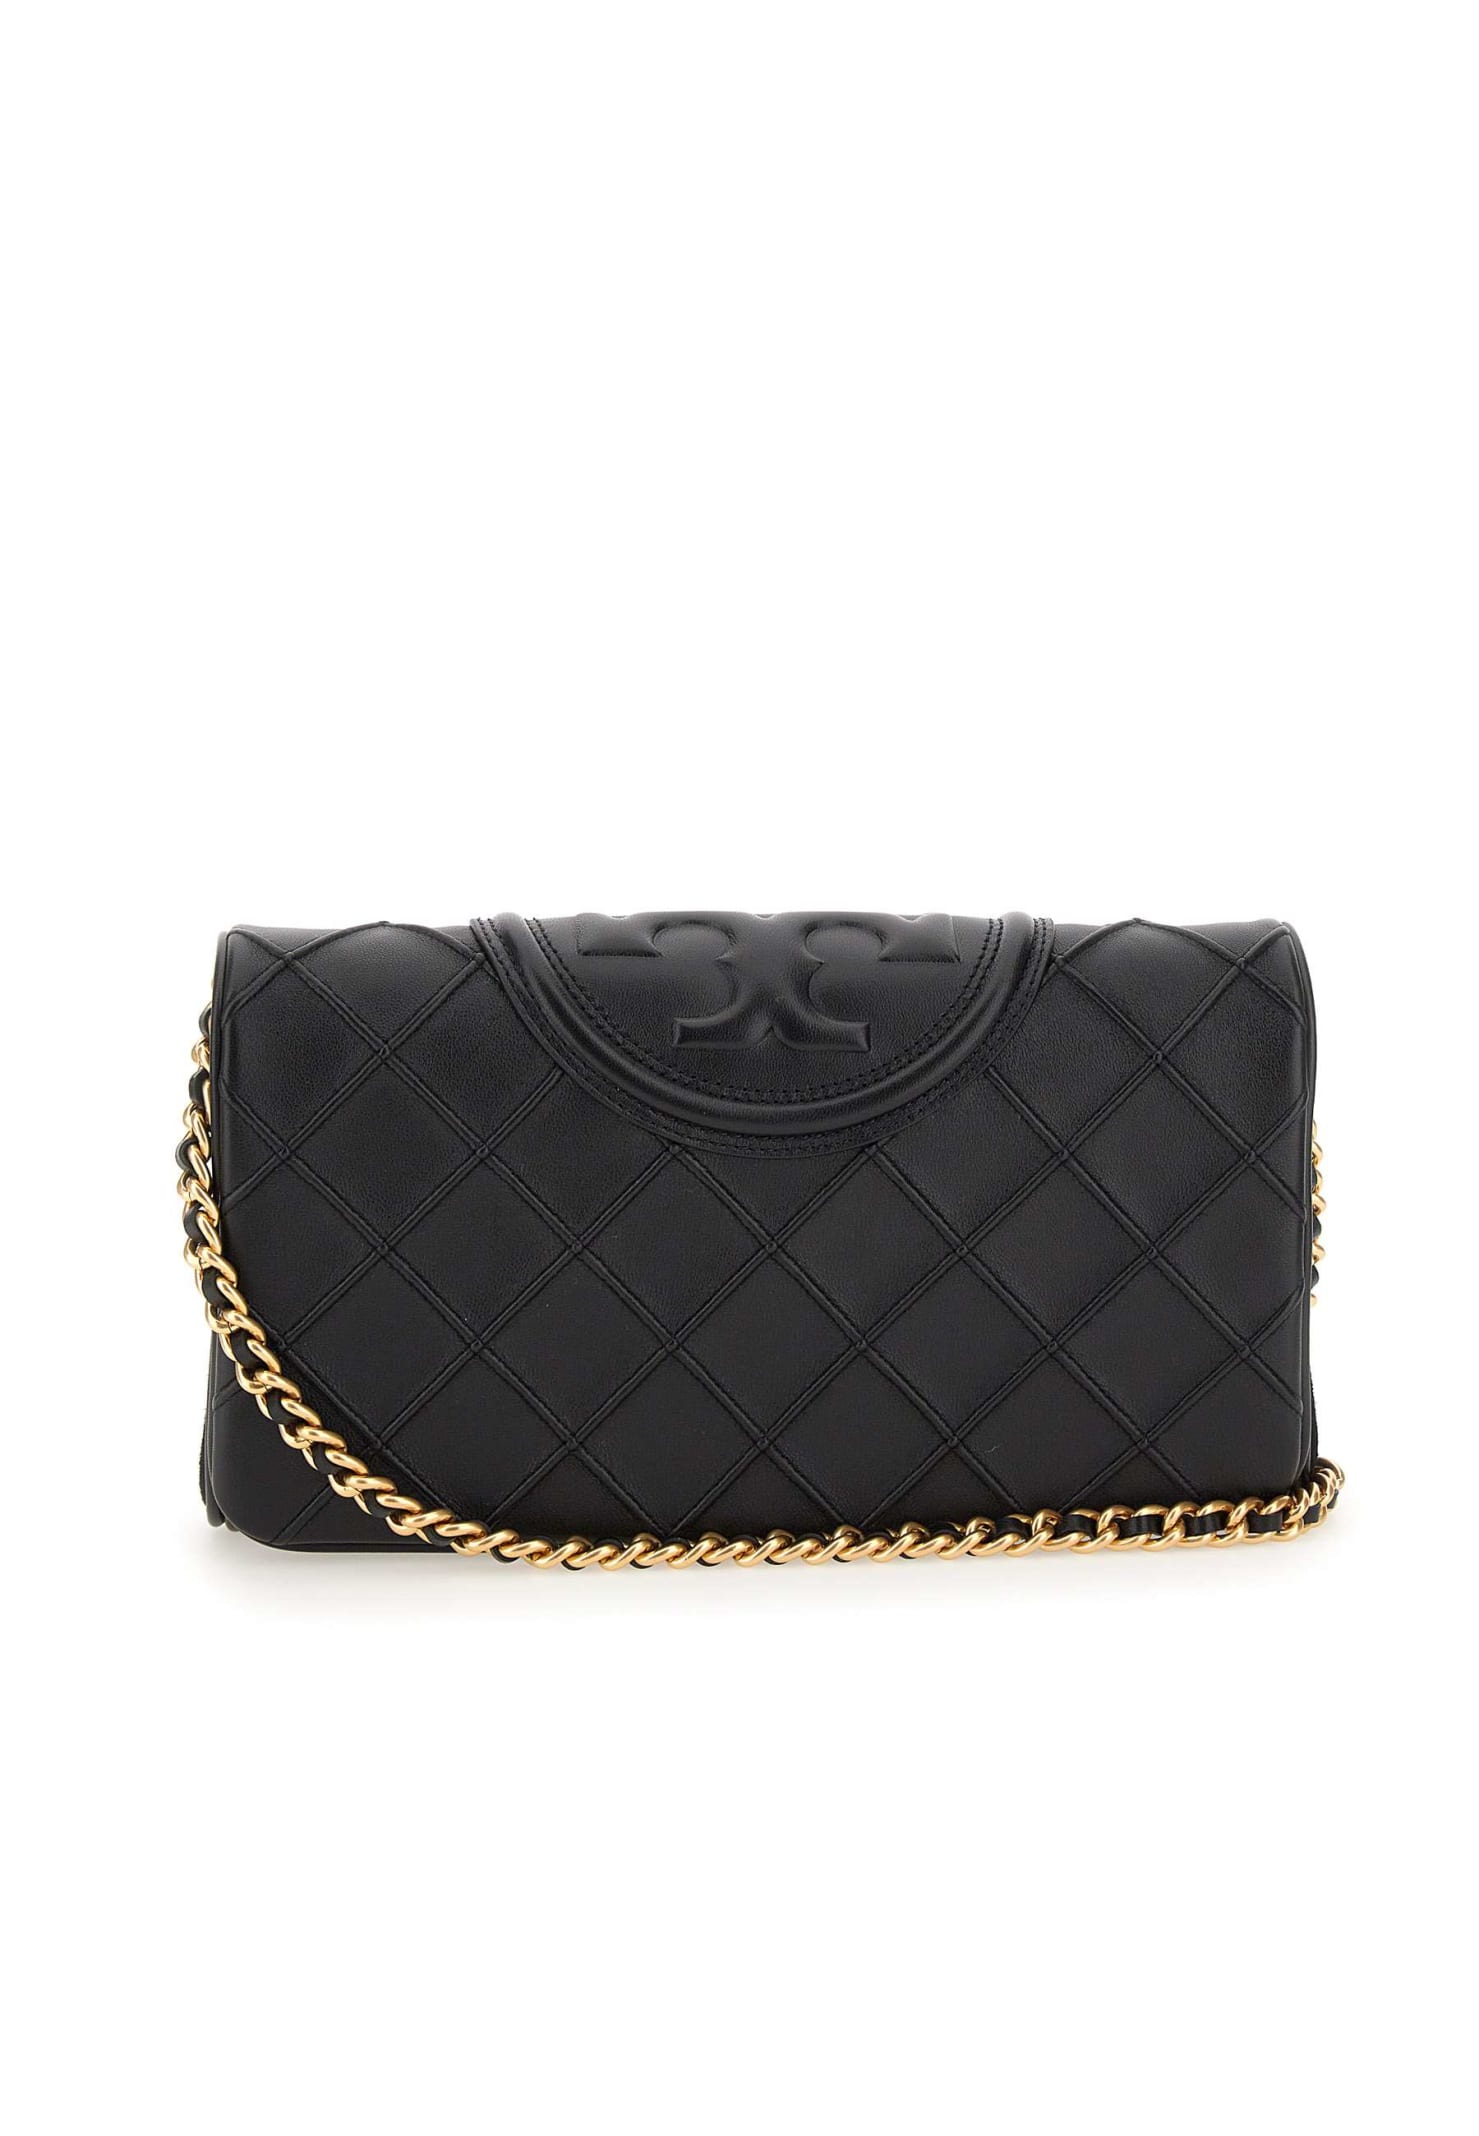 Tory Burch Fleming Soft Clutch Leather Bag In Black | ModeSens